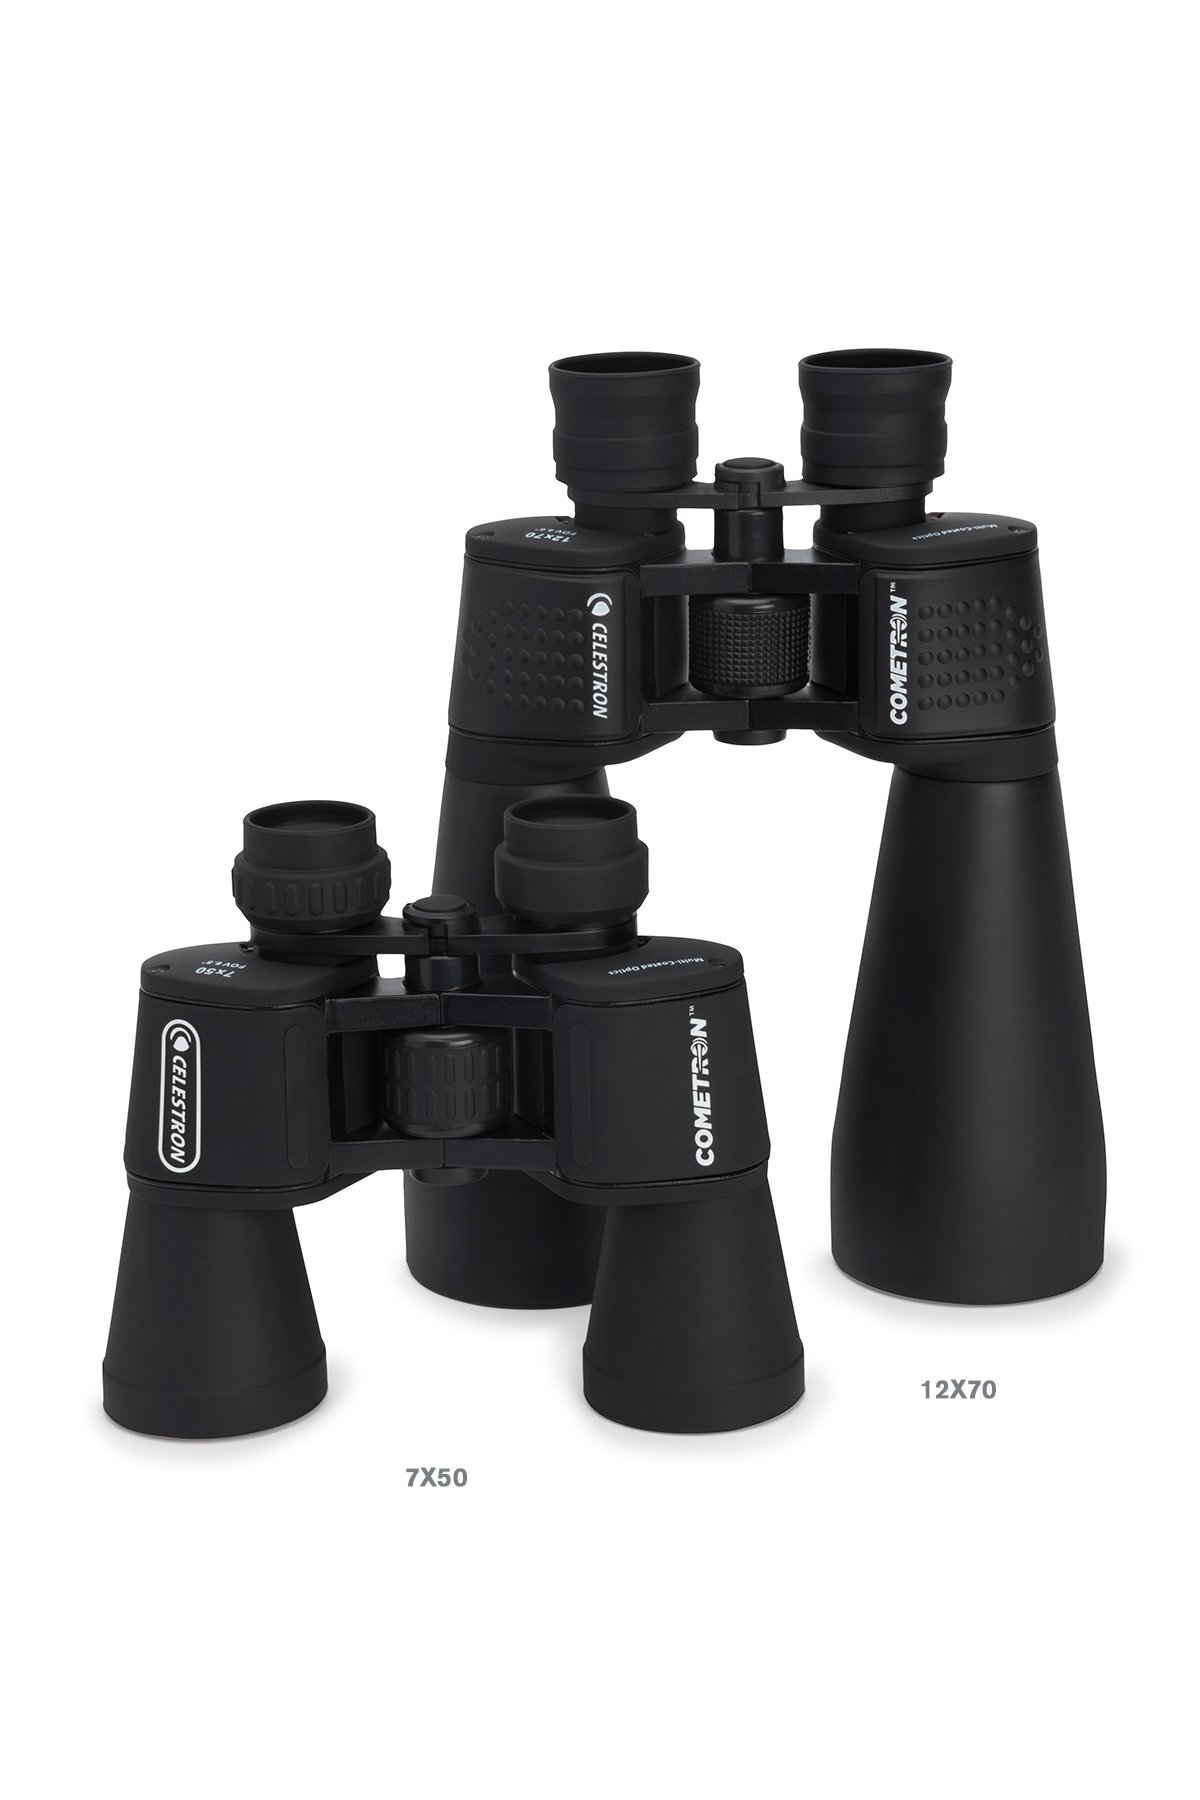 Celestron - Cometron 7x50 Bincoulars - Beginner Astronomy Binoculars - Large 50mm Objective Lenses - Wide Field of View 7x Magnification